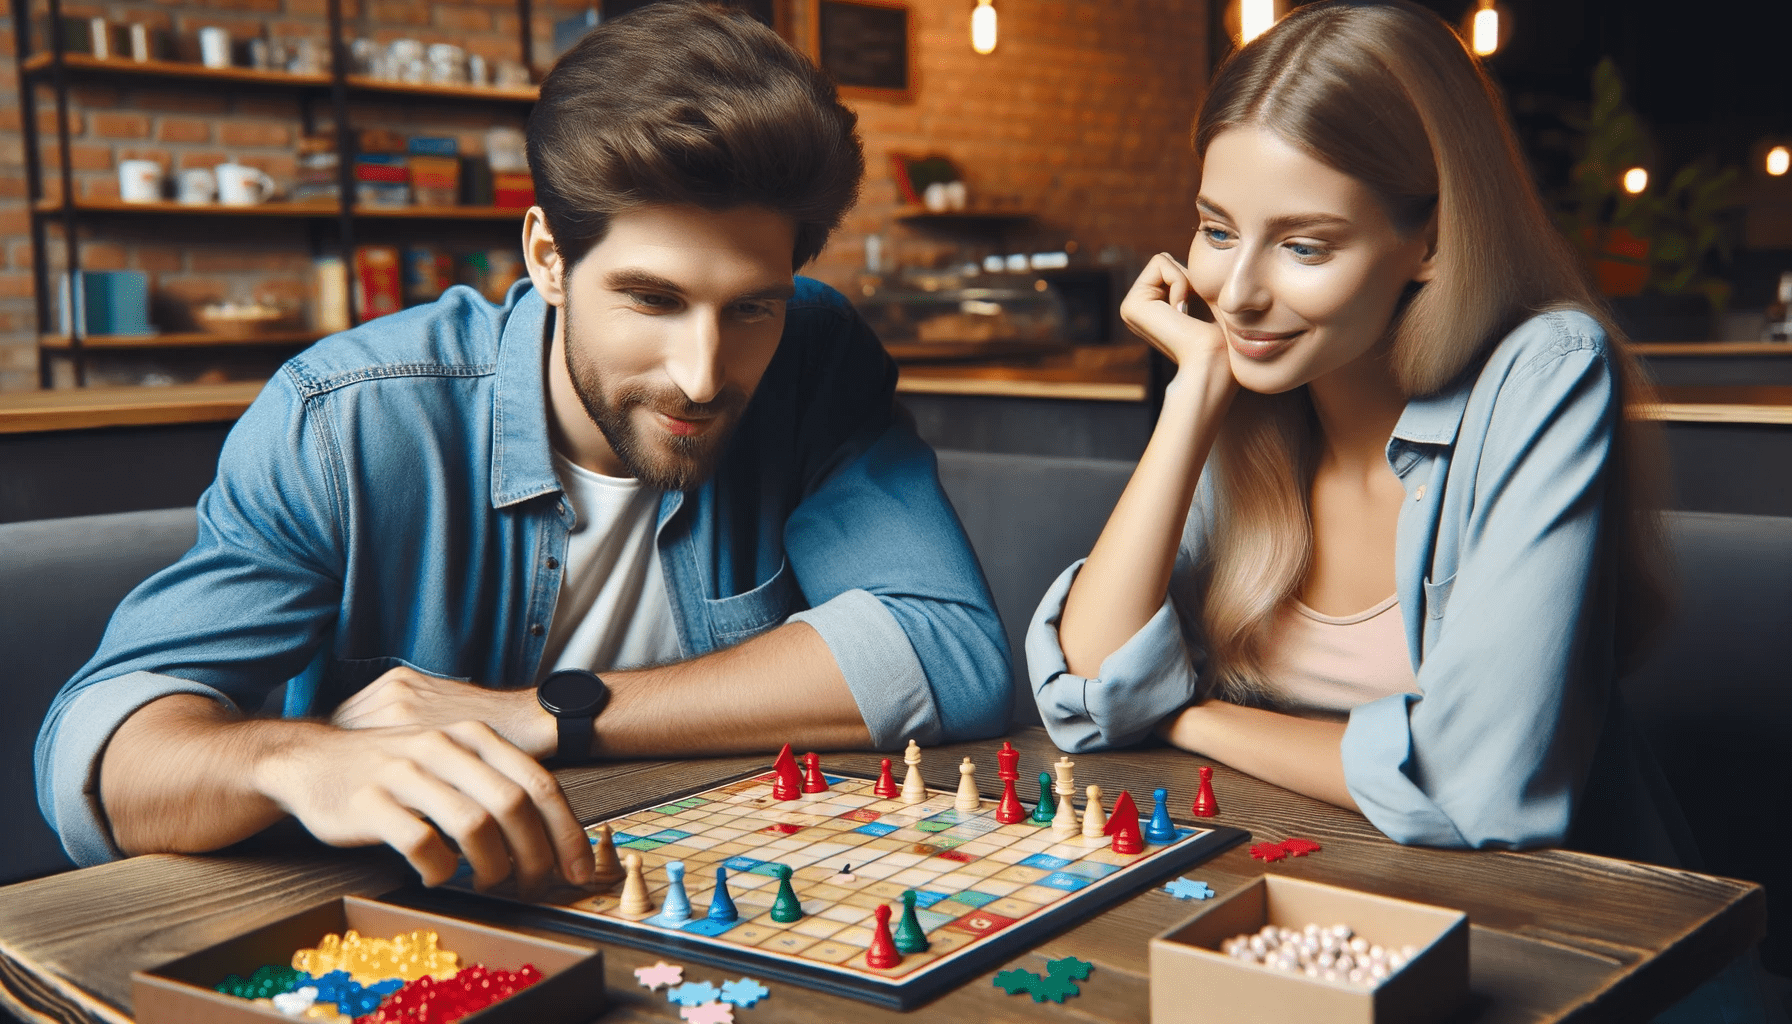 New couple playing board game and having fun